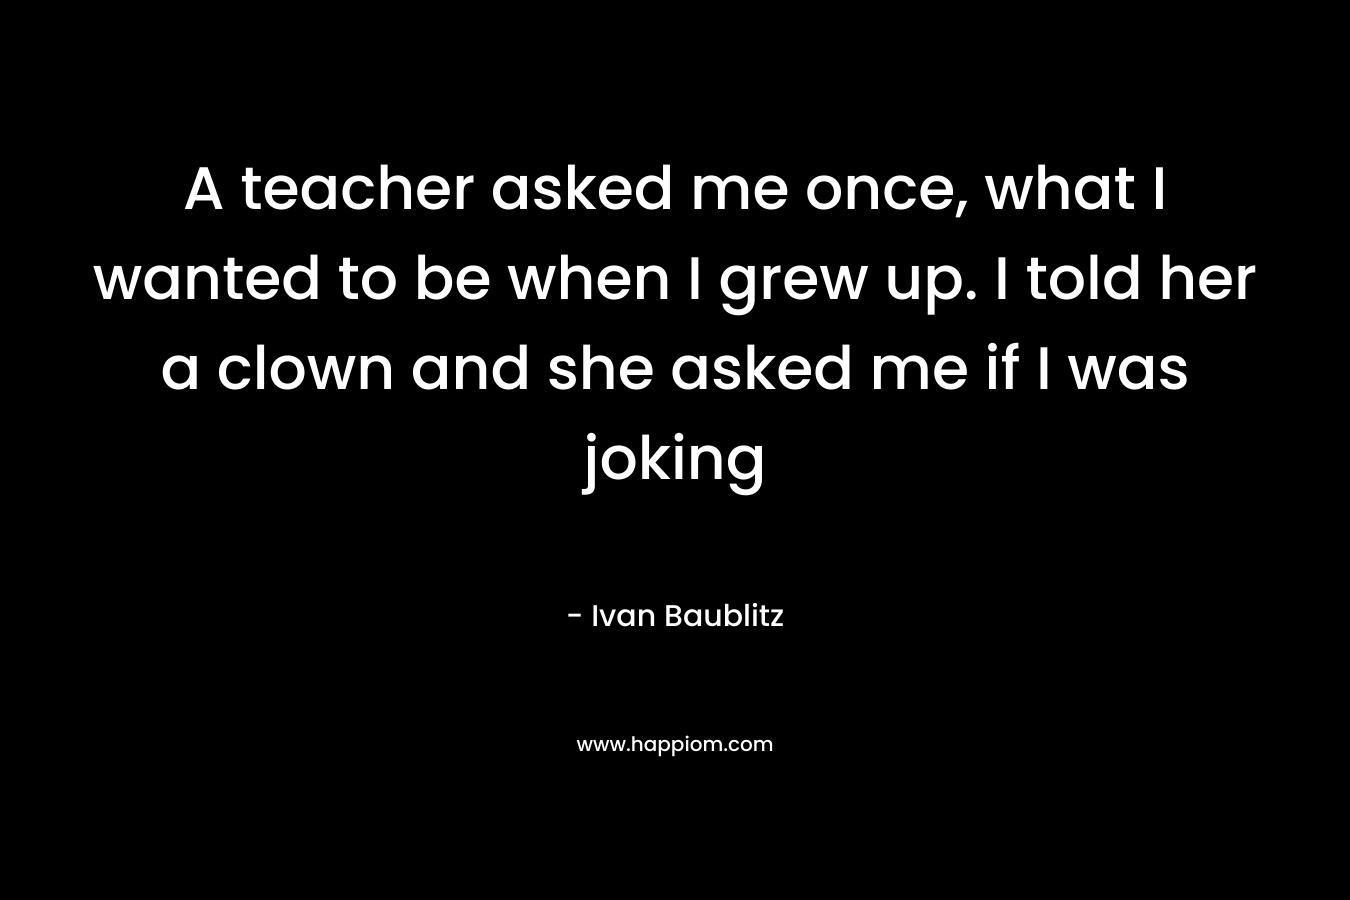 A teacher asked me once, what I wanted to be when I grew up. I told her a clown and she asked me if I was joking – Ivan Baublitz